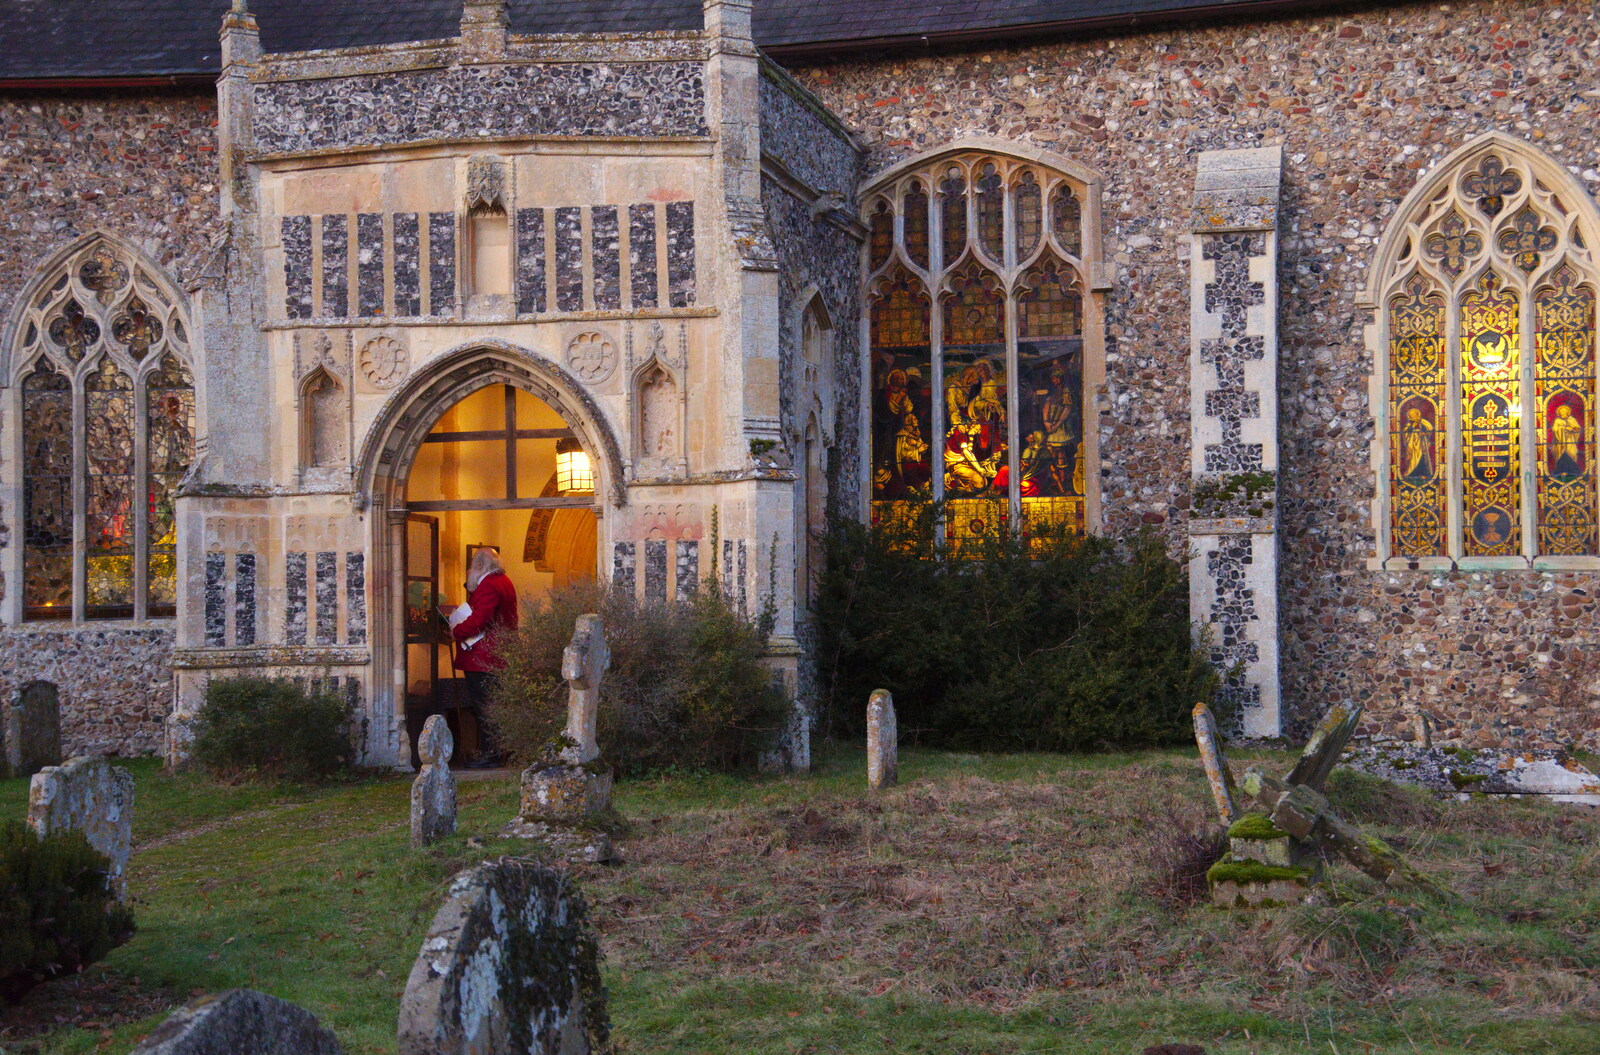 There's a nice glow through stained-glass windows from The GSB at Thornham Magna and Yaxley Cherry Tree, Suffolk - 15th December 2019